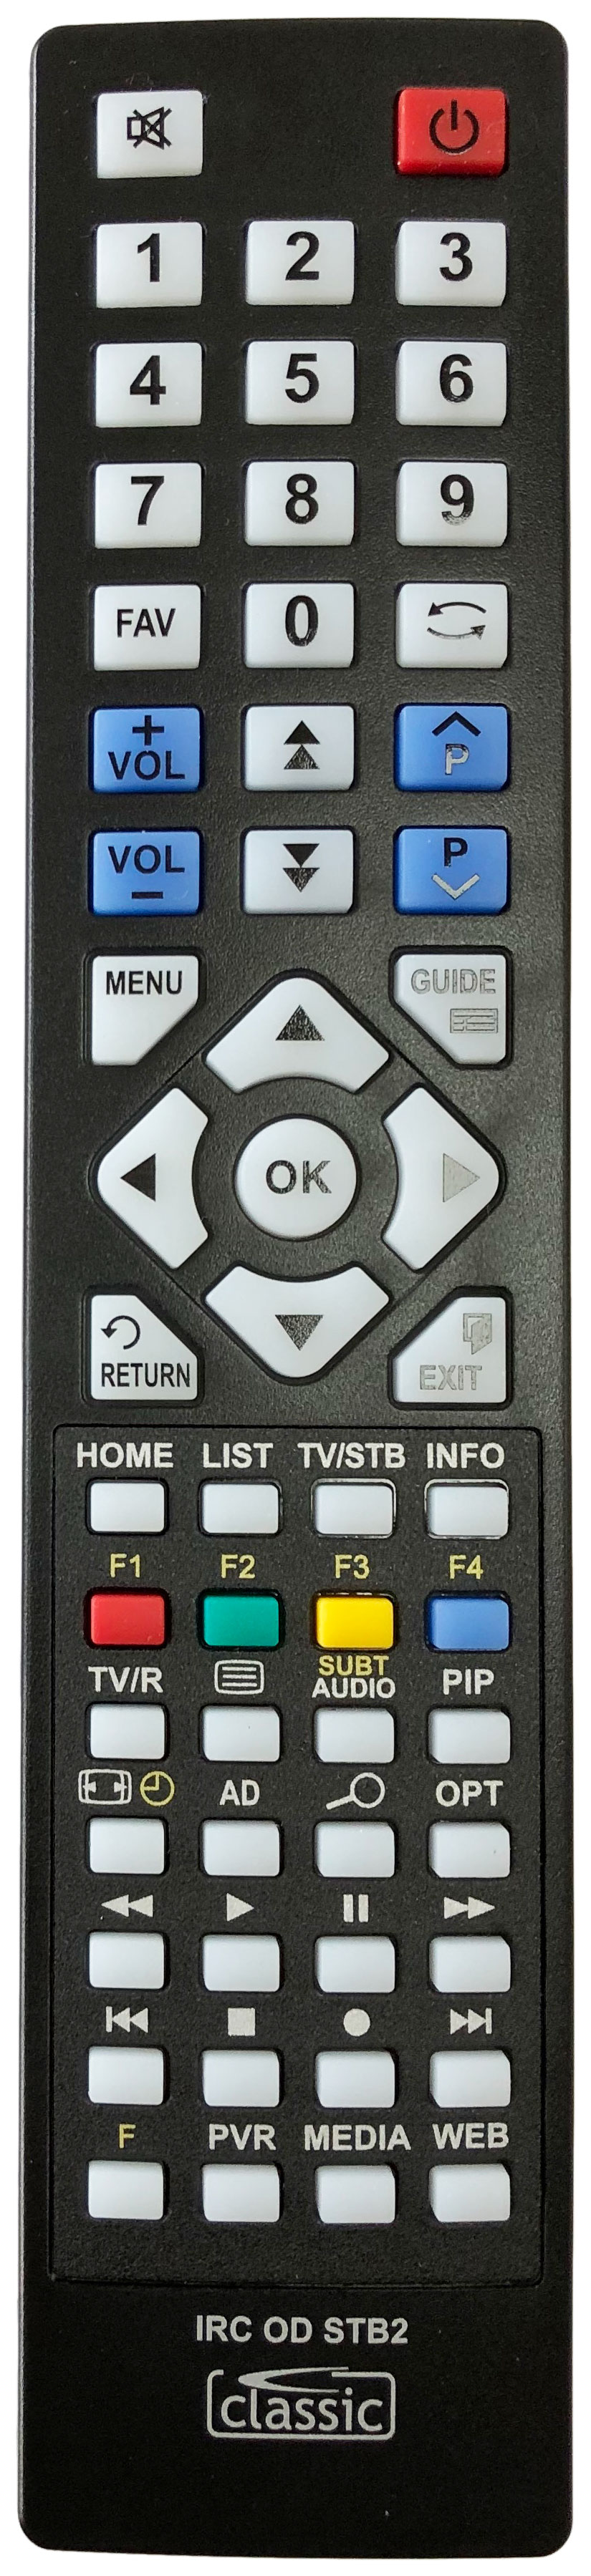 METRONIC SATHD100 Remote Control